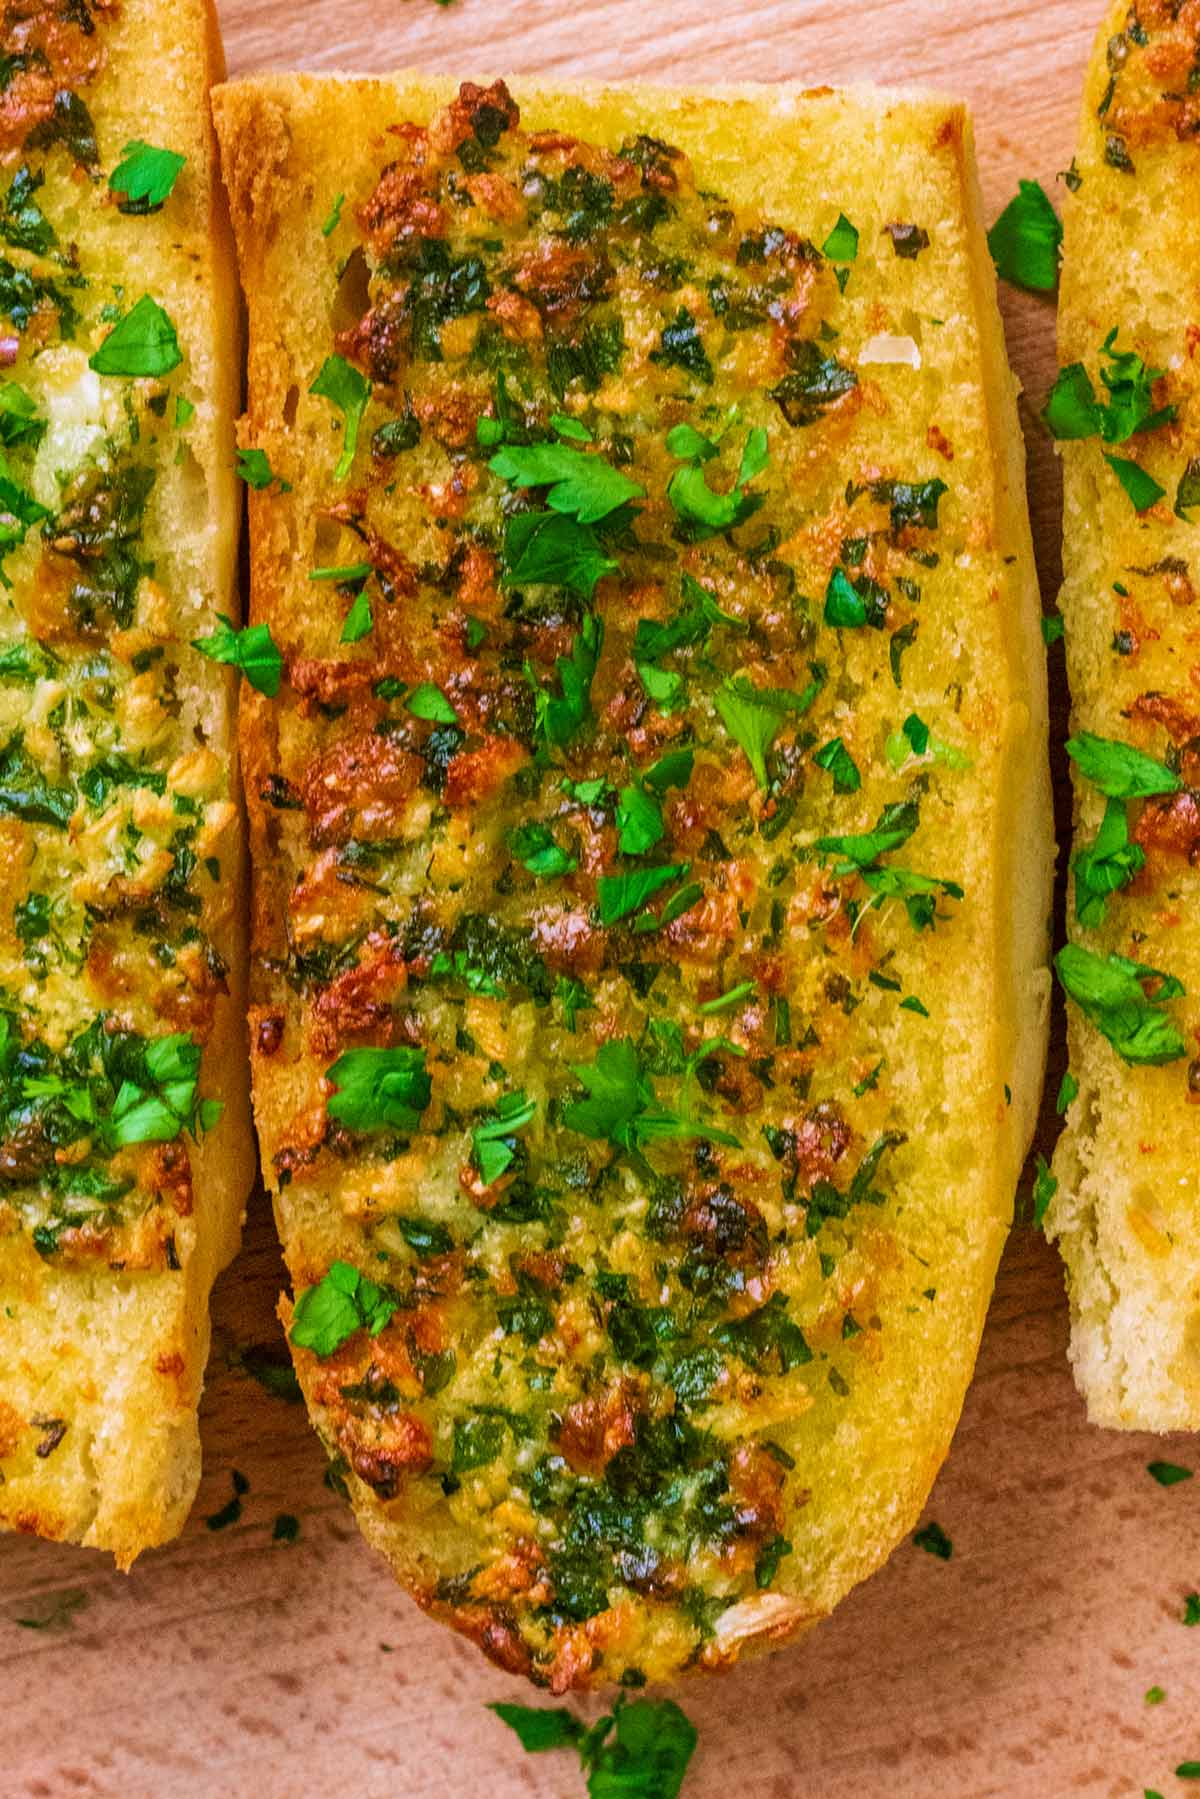 A slice of garlic bread topped with chopped parsley.